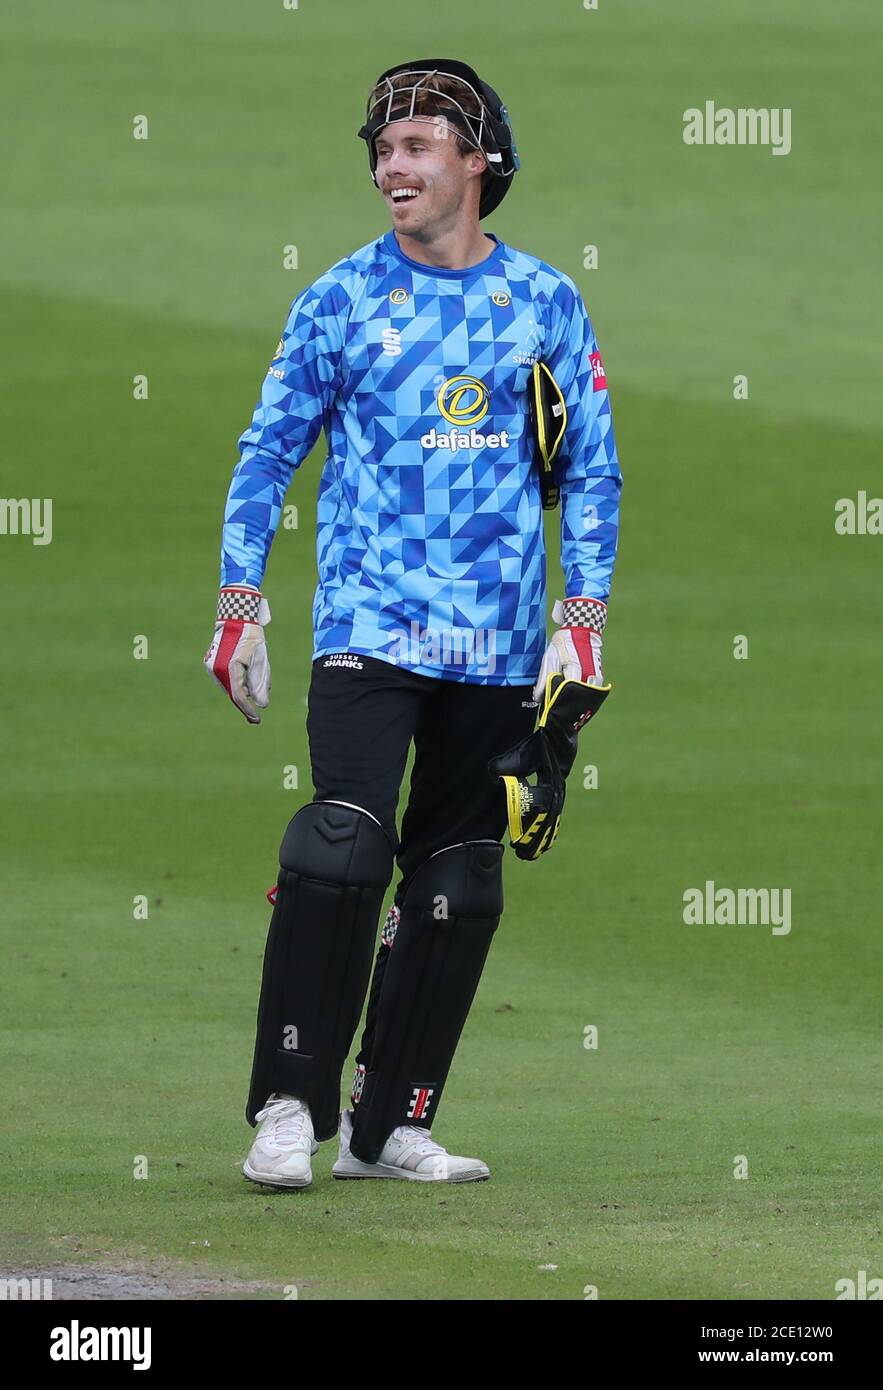 Hove, UK. 30th Aug, 2020. Sussex's Phil Salt during the Vitality Blast T20 match between Sussex Sharks and Hampshire at The 1st Central County Ground, Hove Credit: James Boardman/Alamy Live News Stock Photo